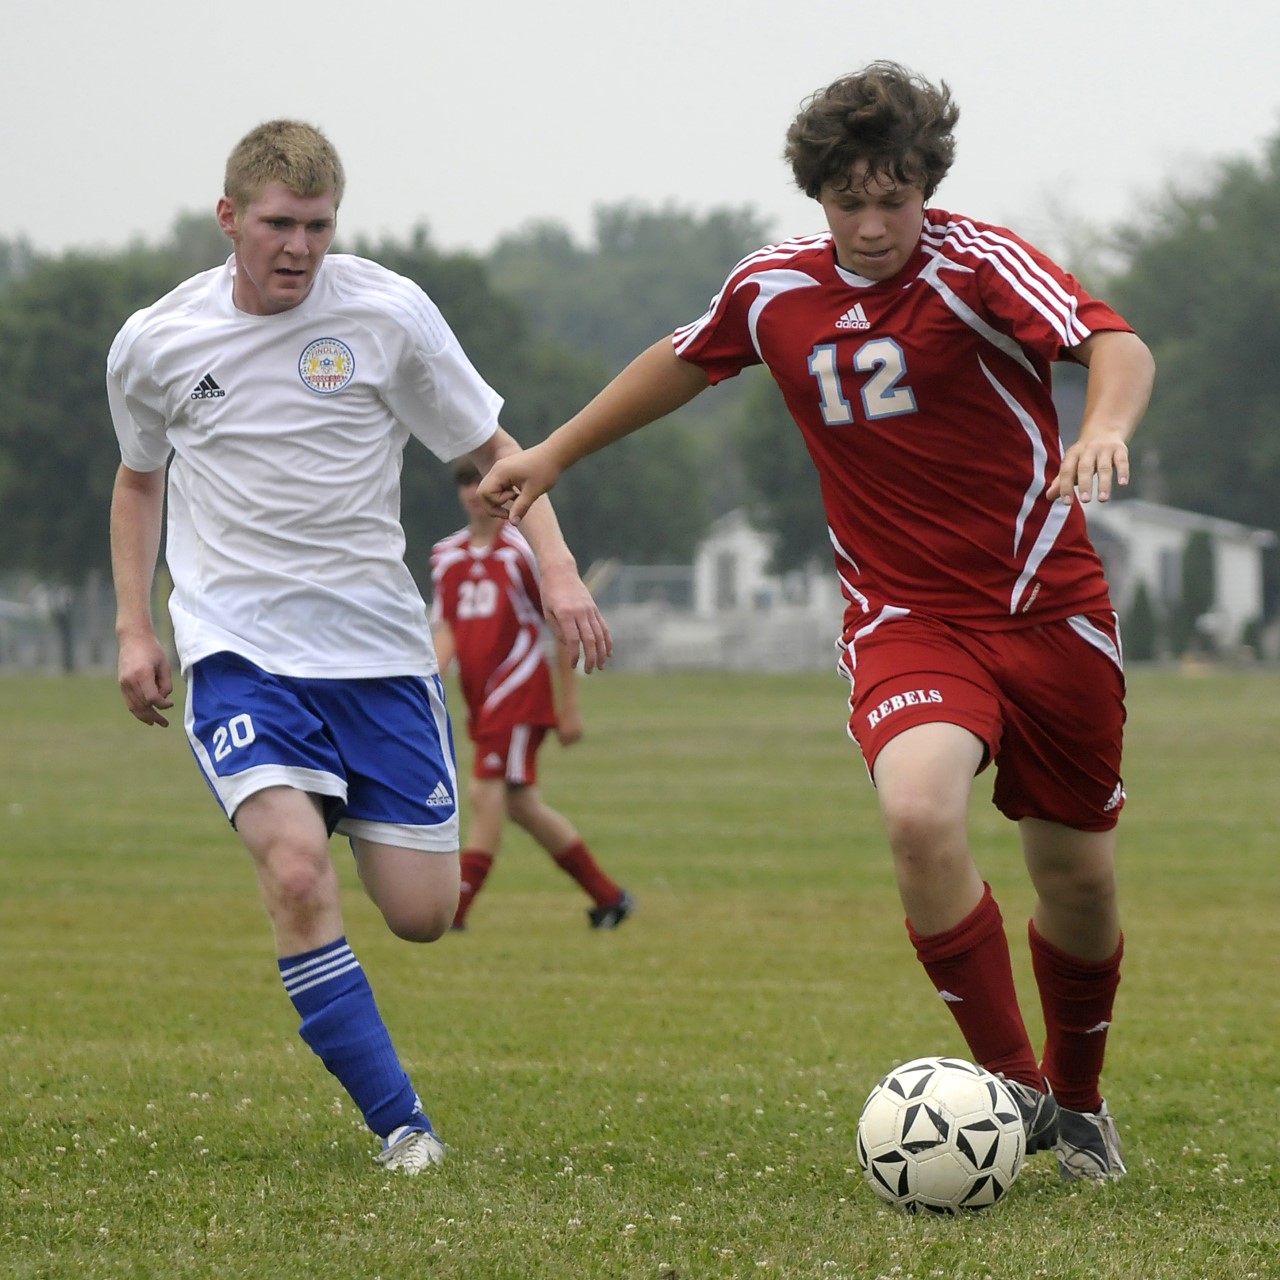 Two male high school soccer players challenge for the ball